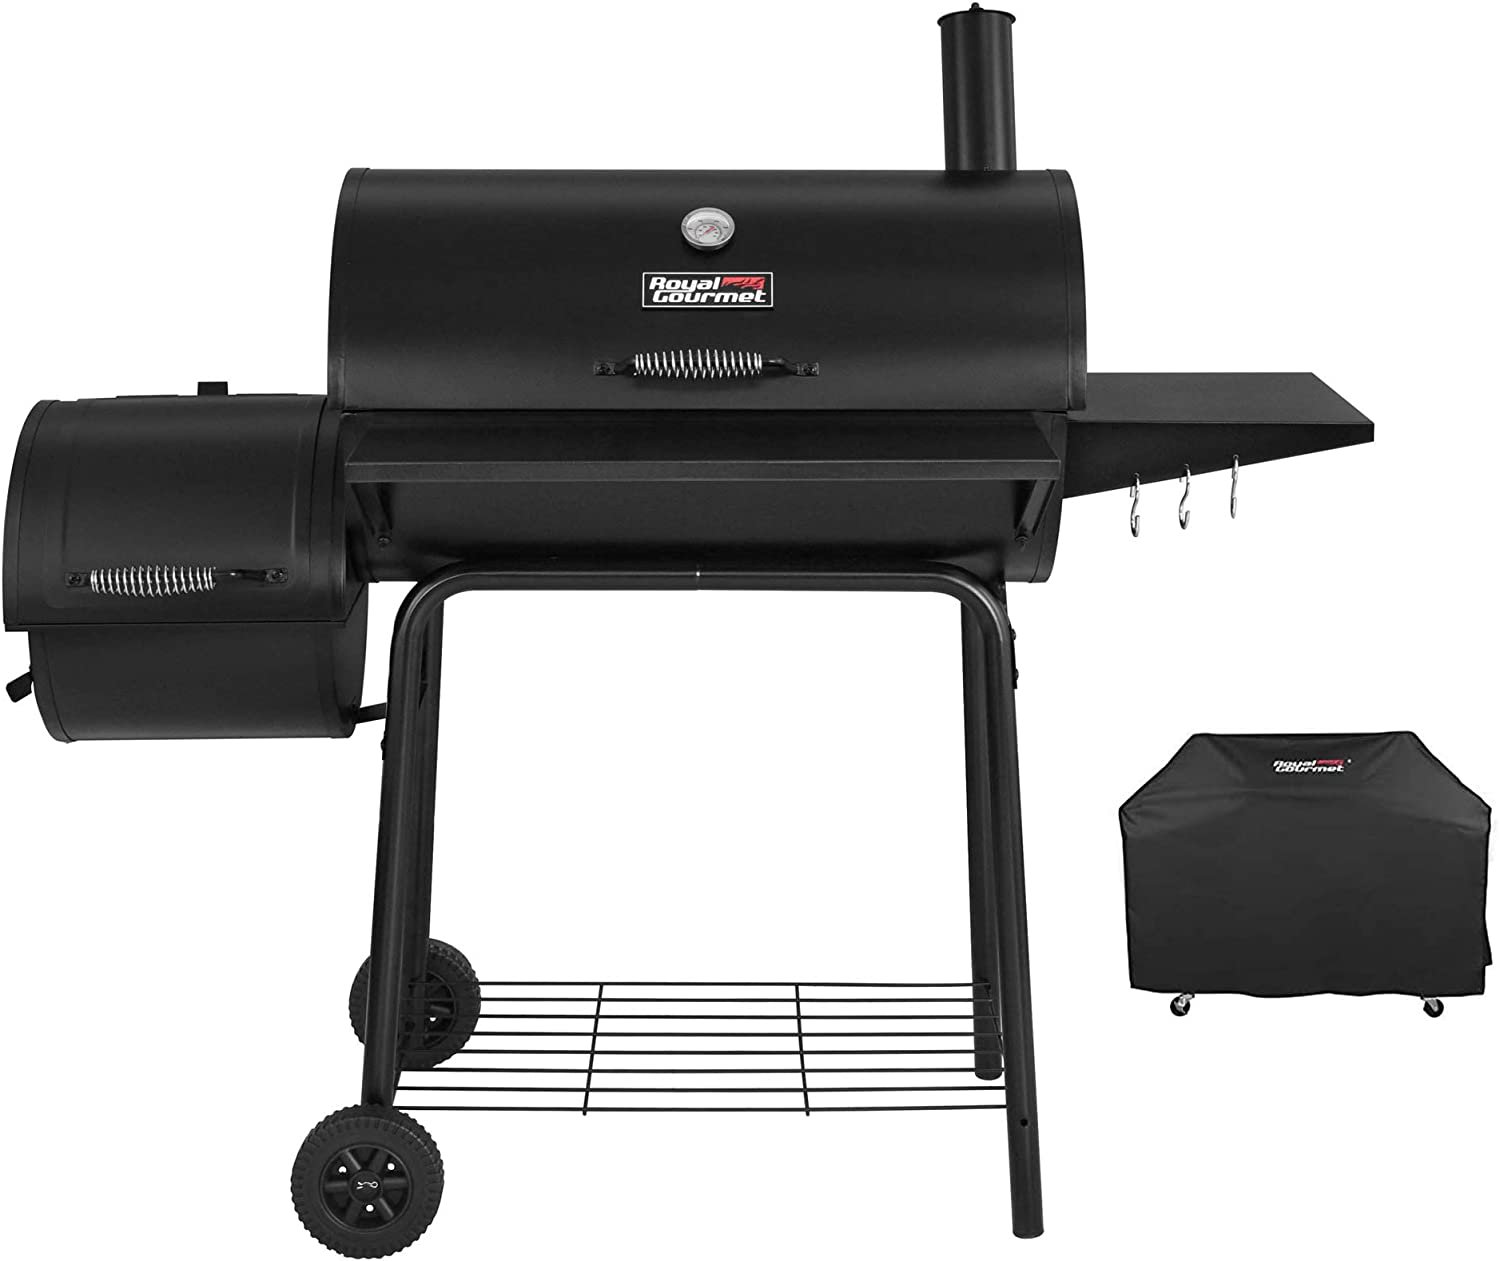 Royal Gourmet CC1830 SC Charcoal Grill Offset Smoker with Cover, 811 Sq, In